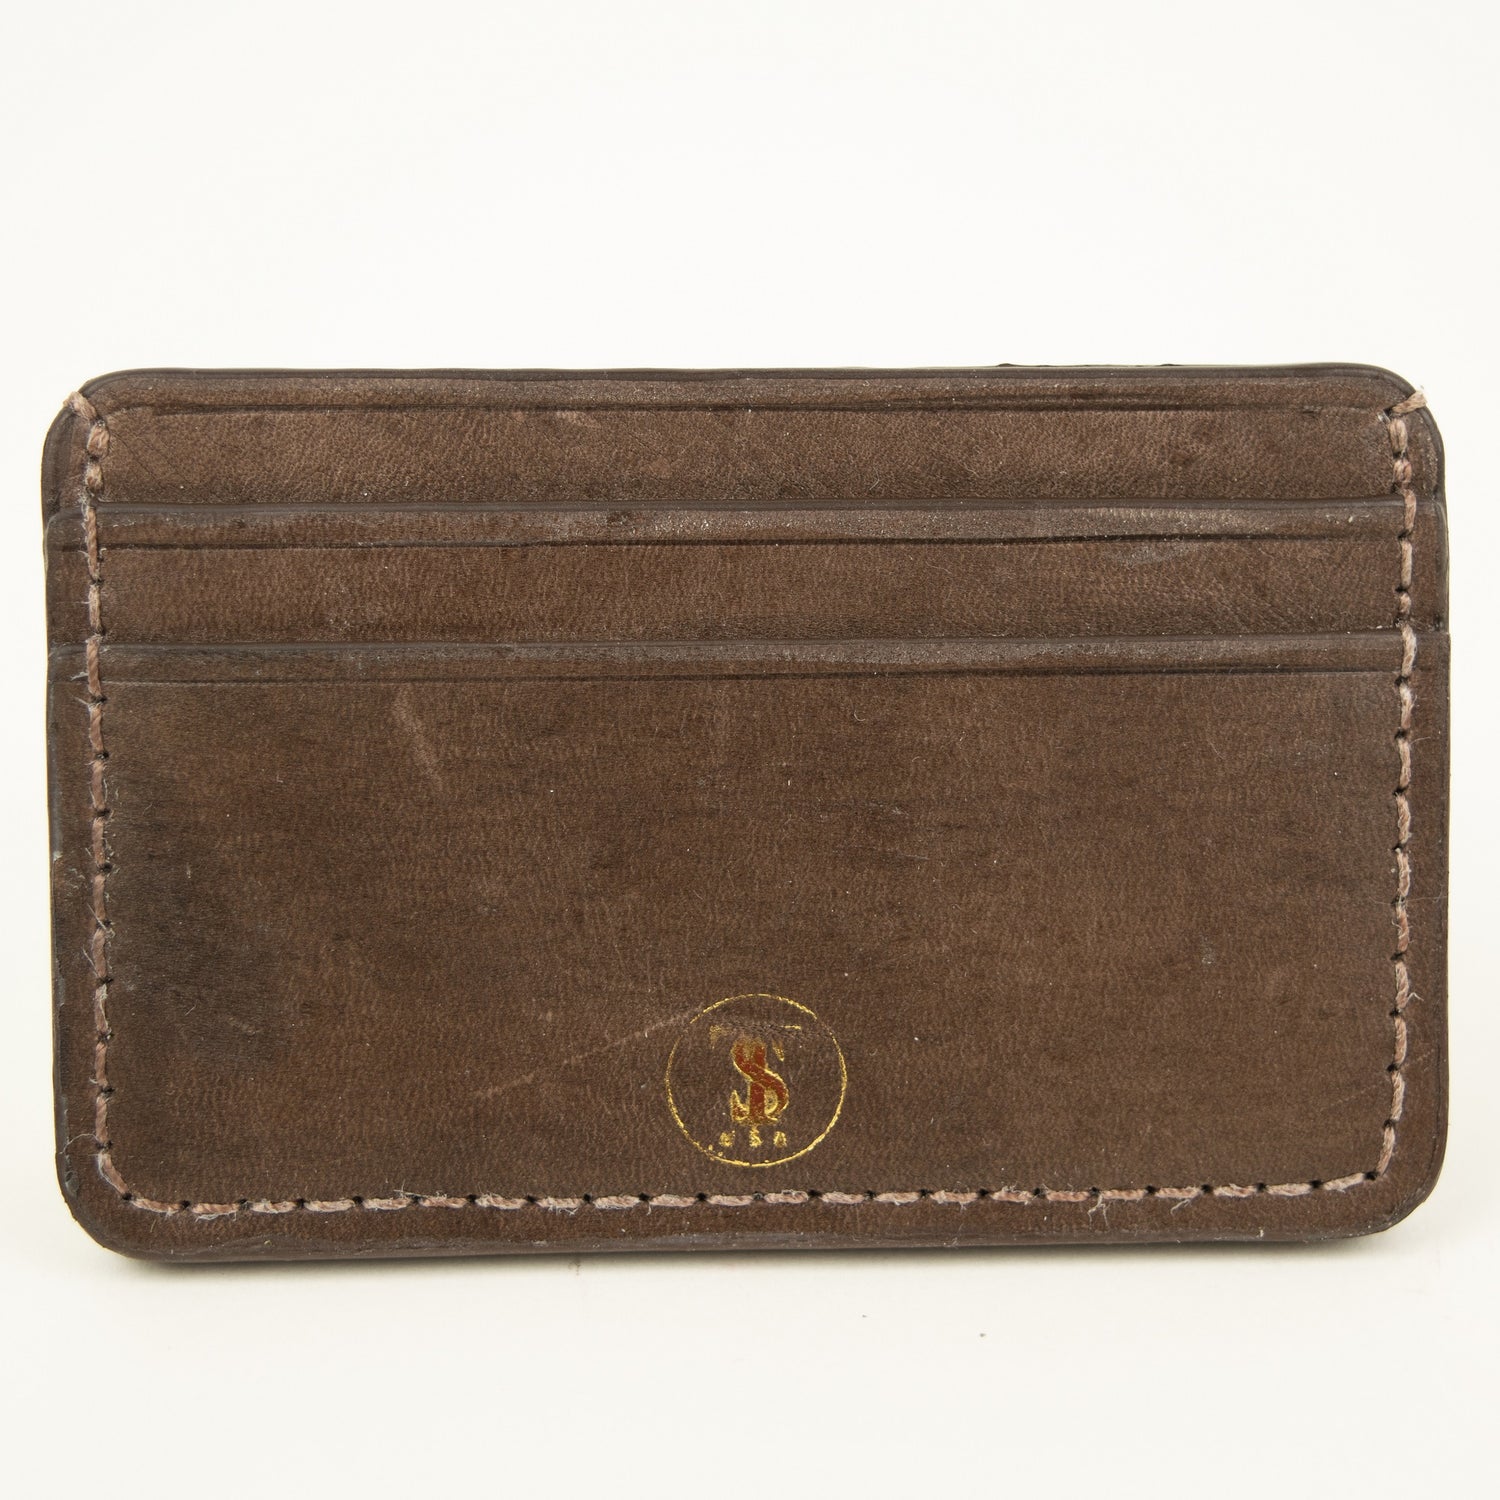 Front view of Distressed finish Chocolate brown leather slim card case with two front pockets center pocket gold brand logos on front 